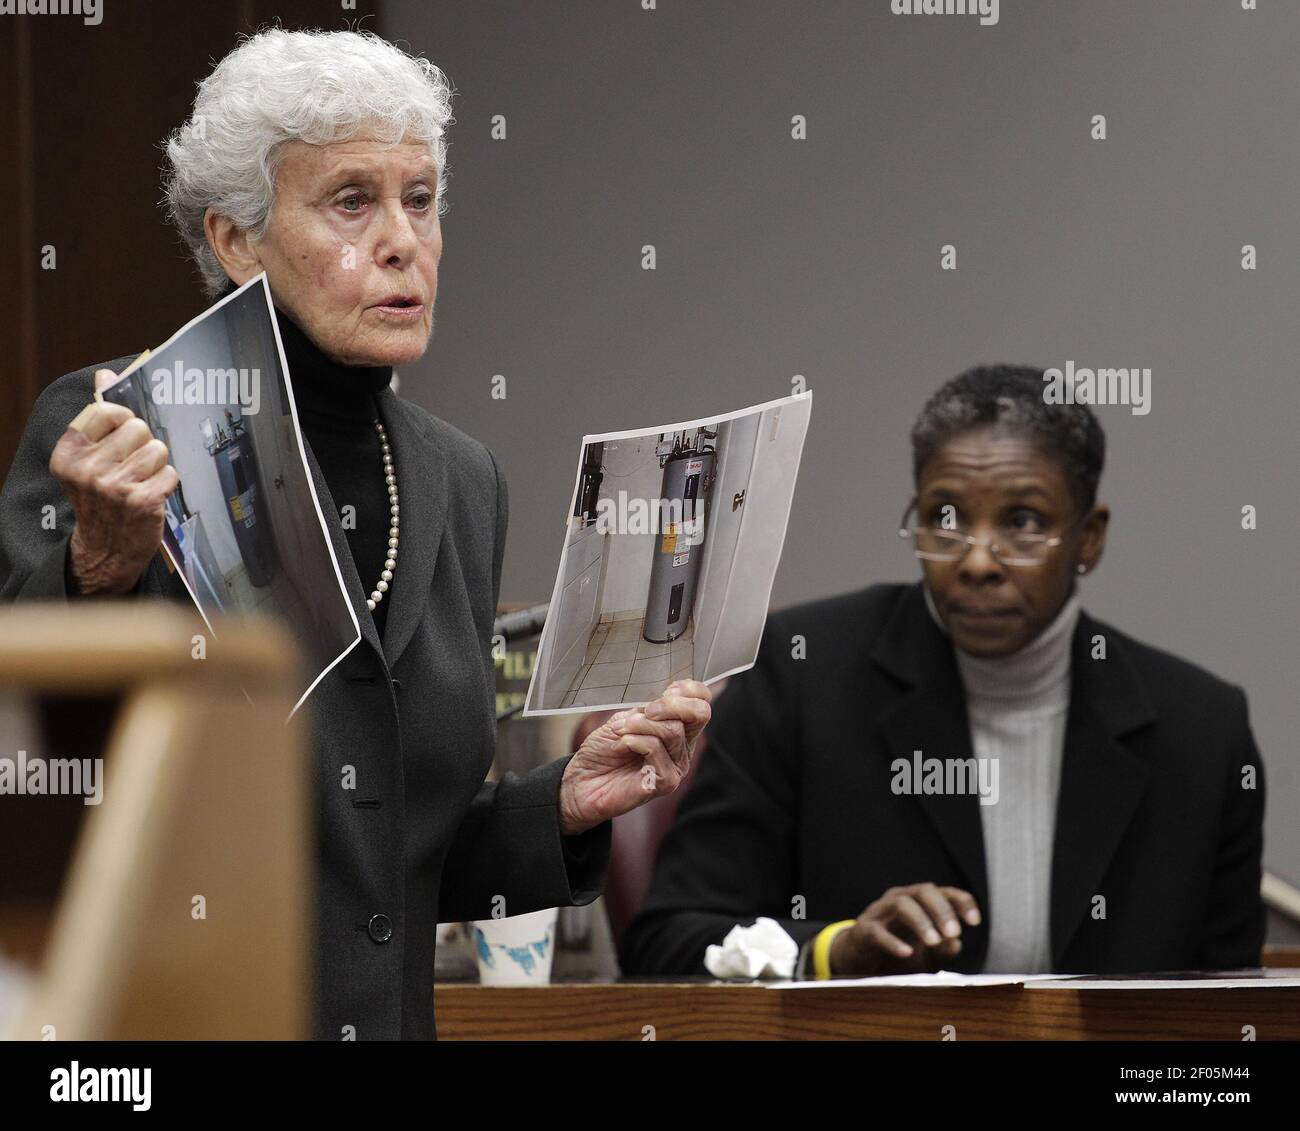 Florida state attorney Sally Weintraub, left, shows the jury photos of the laundry room where Rilya Wilson was kept for days as Pamela Graham, right, testifies in Miami, Florida on Monday, December 17, 2012. Geralyn Graham, not pictured, is charged with the murder of four-year-old Rilya Wilson. (Photo by Carl Juste/Miami Herald/MCT/Sipa USA) Stock Photo